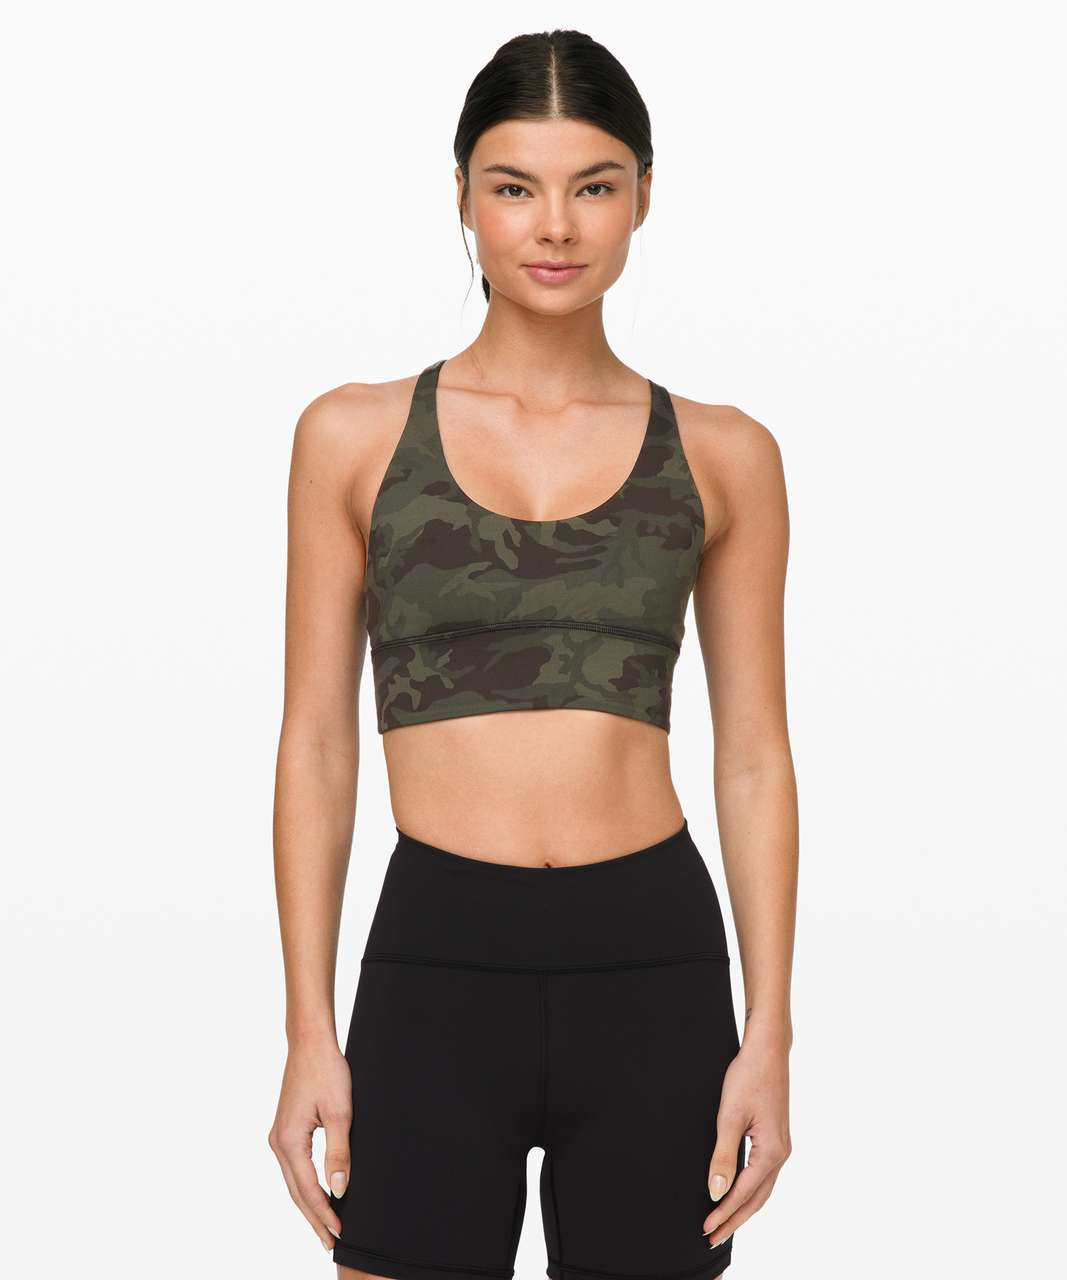 Lululemon Free To Be Moved Bra - Incognito Camo Multi Gator Green